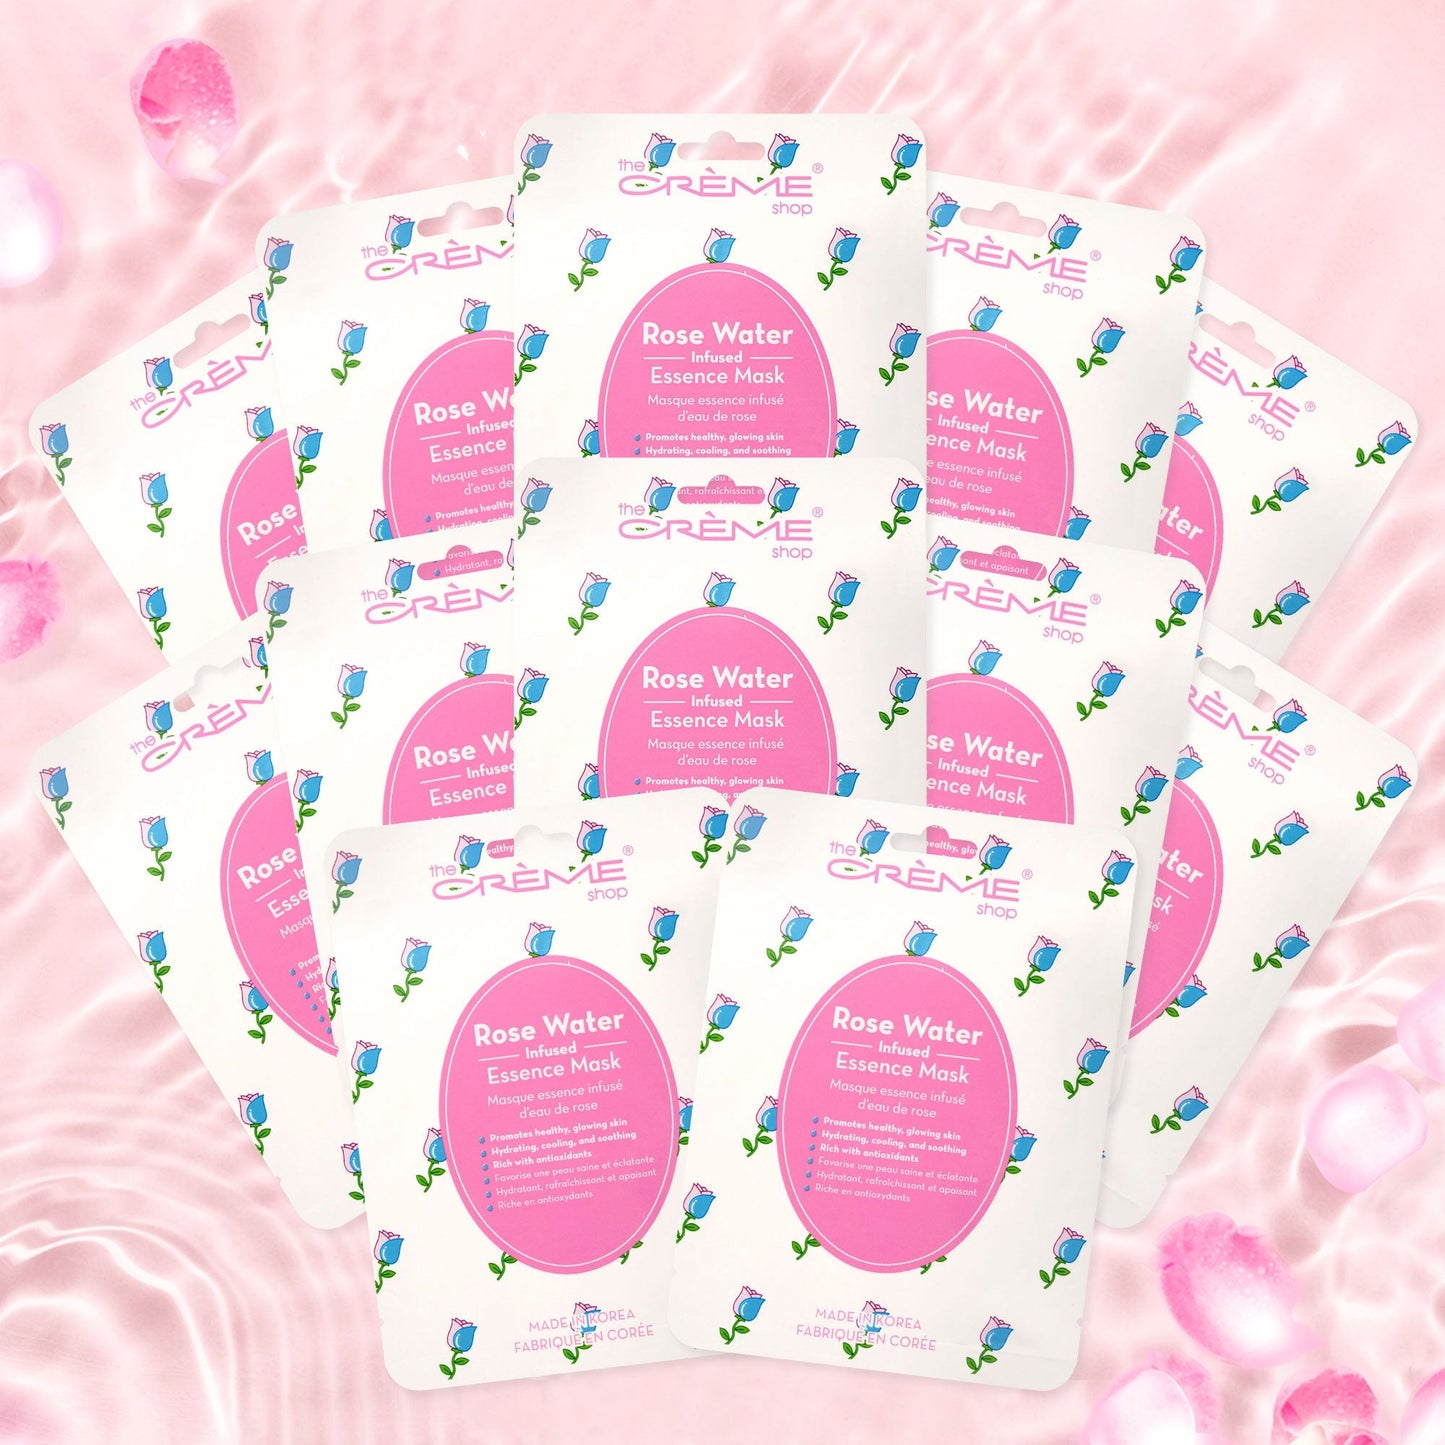 Renewing Mask with Rose Water | For Hydrated Skin (Set of 12) - $36 Value Sheet masks The Crème Shop 